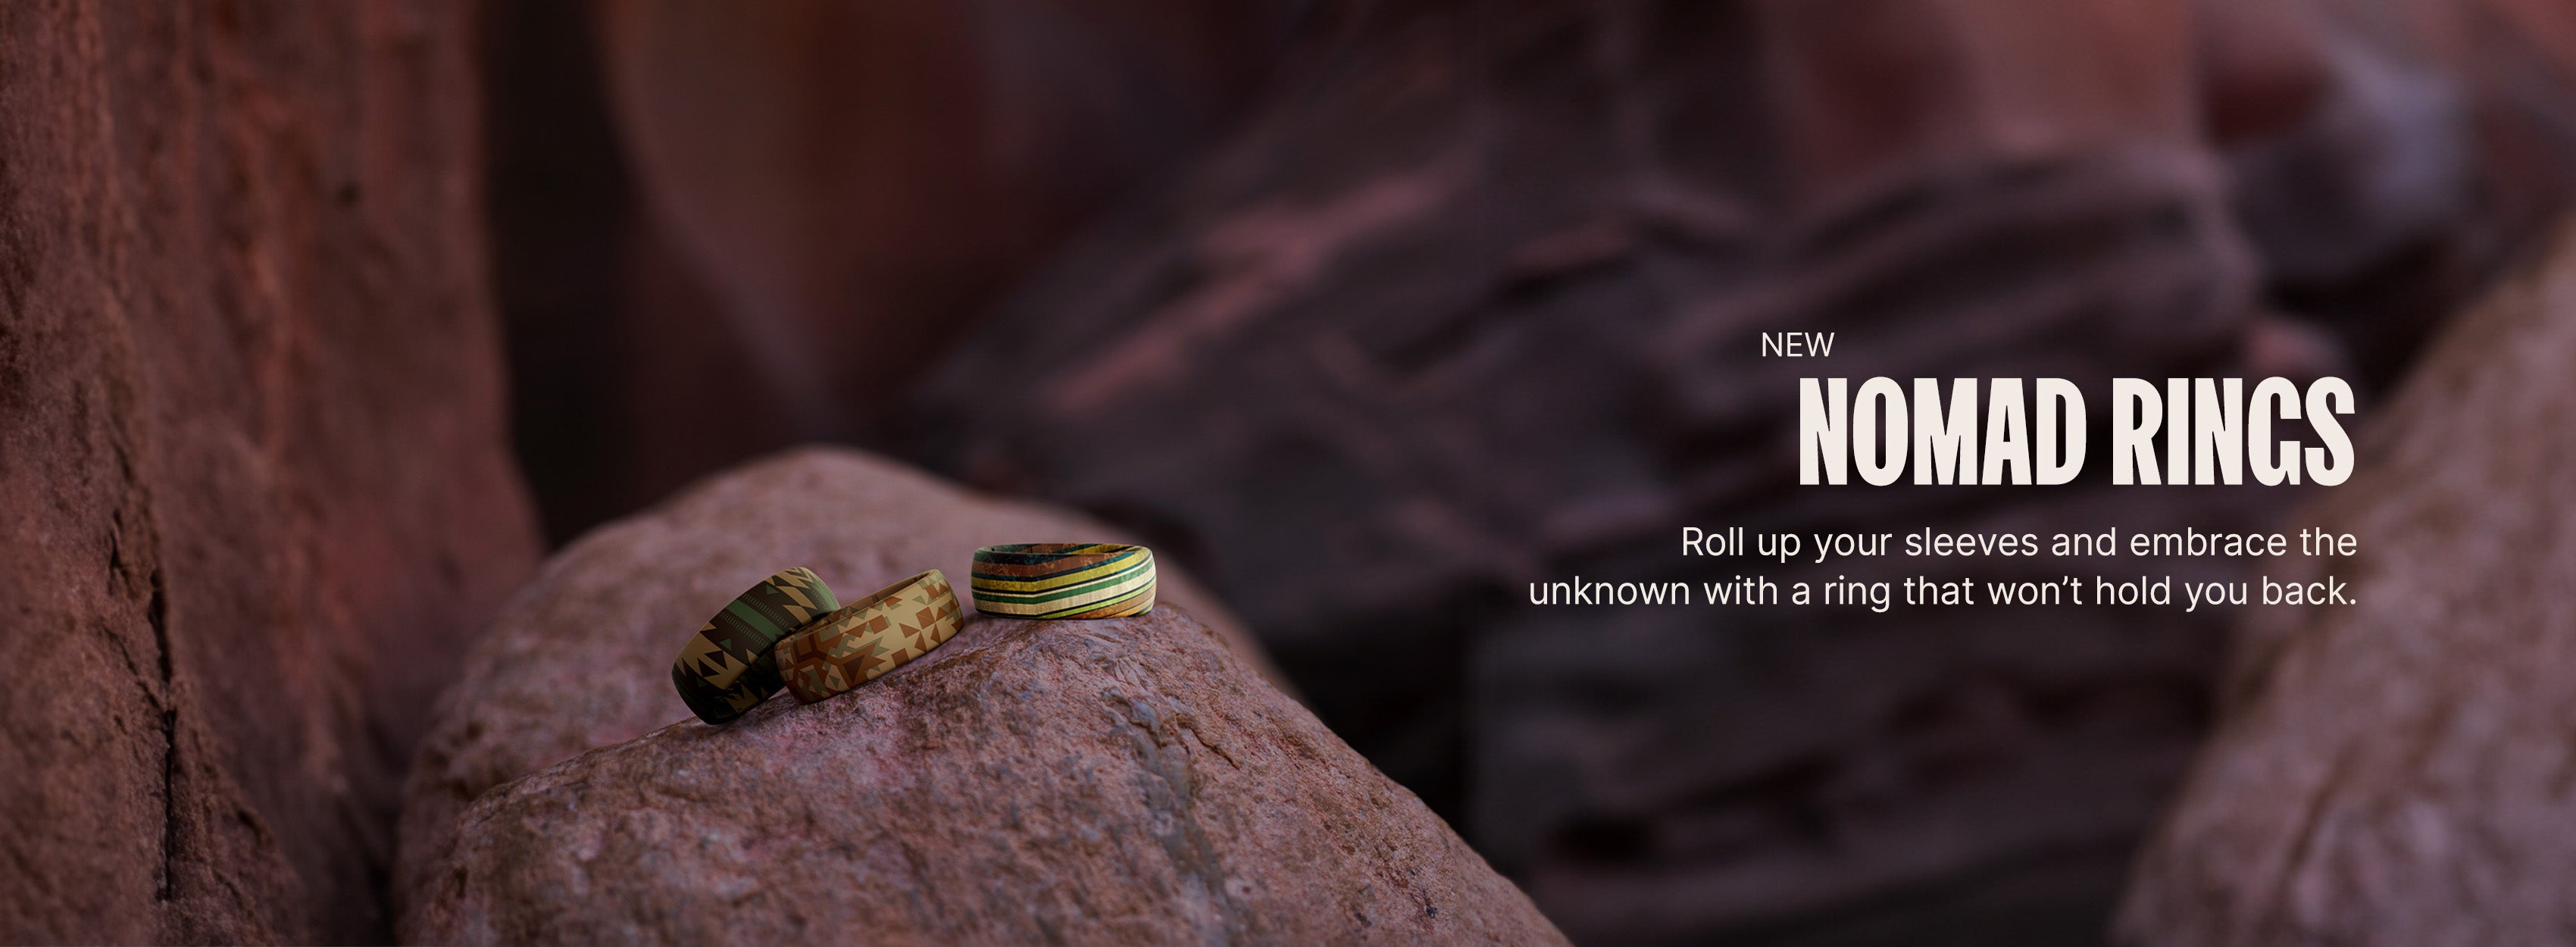 Groove Life Nomad Rings 